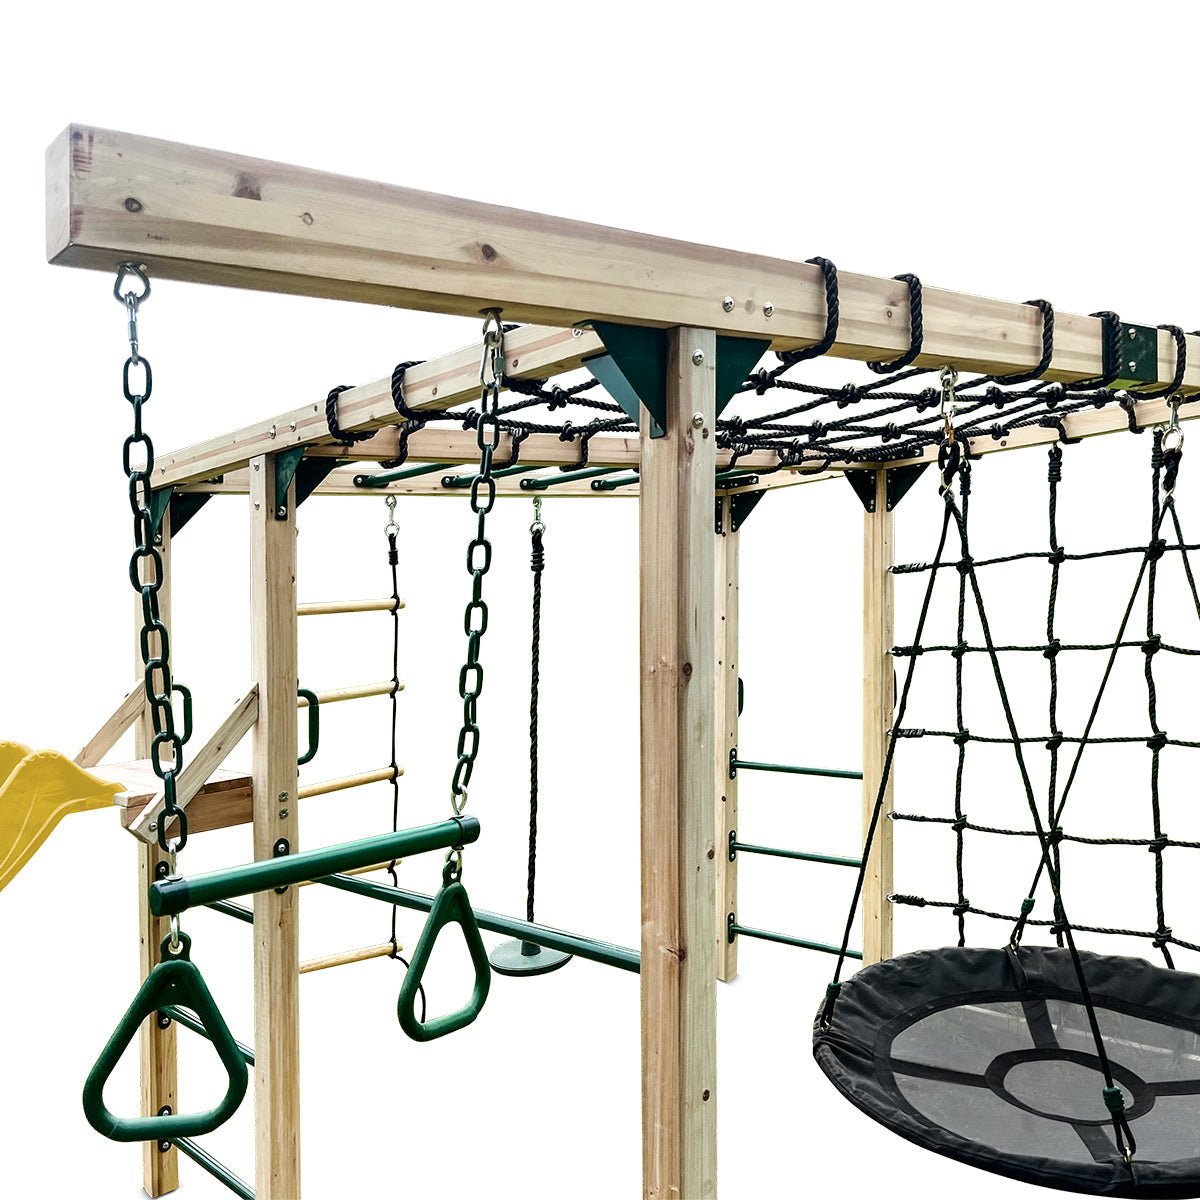 Buy the Best Jungle Gym for Kids' Adventures